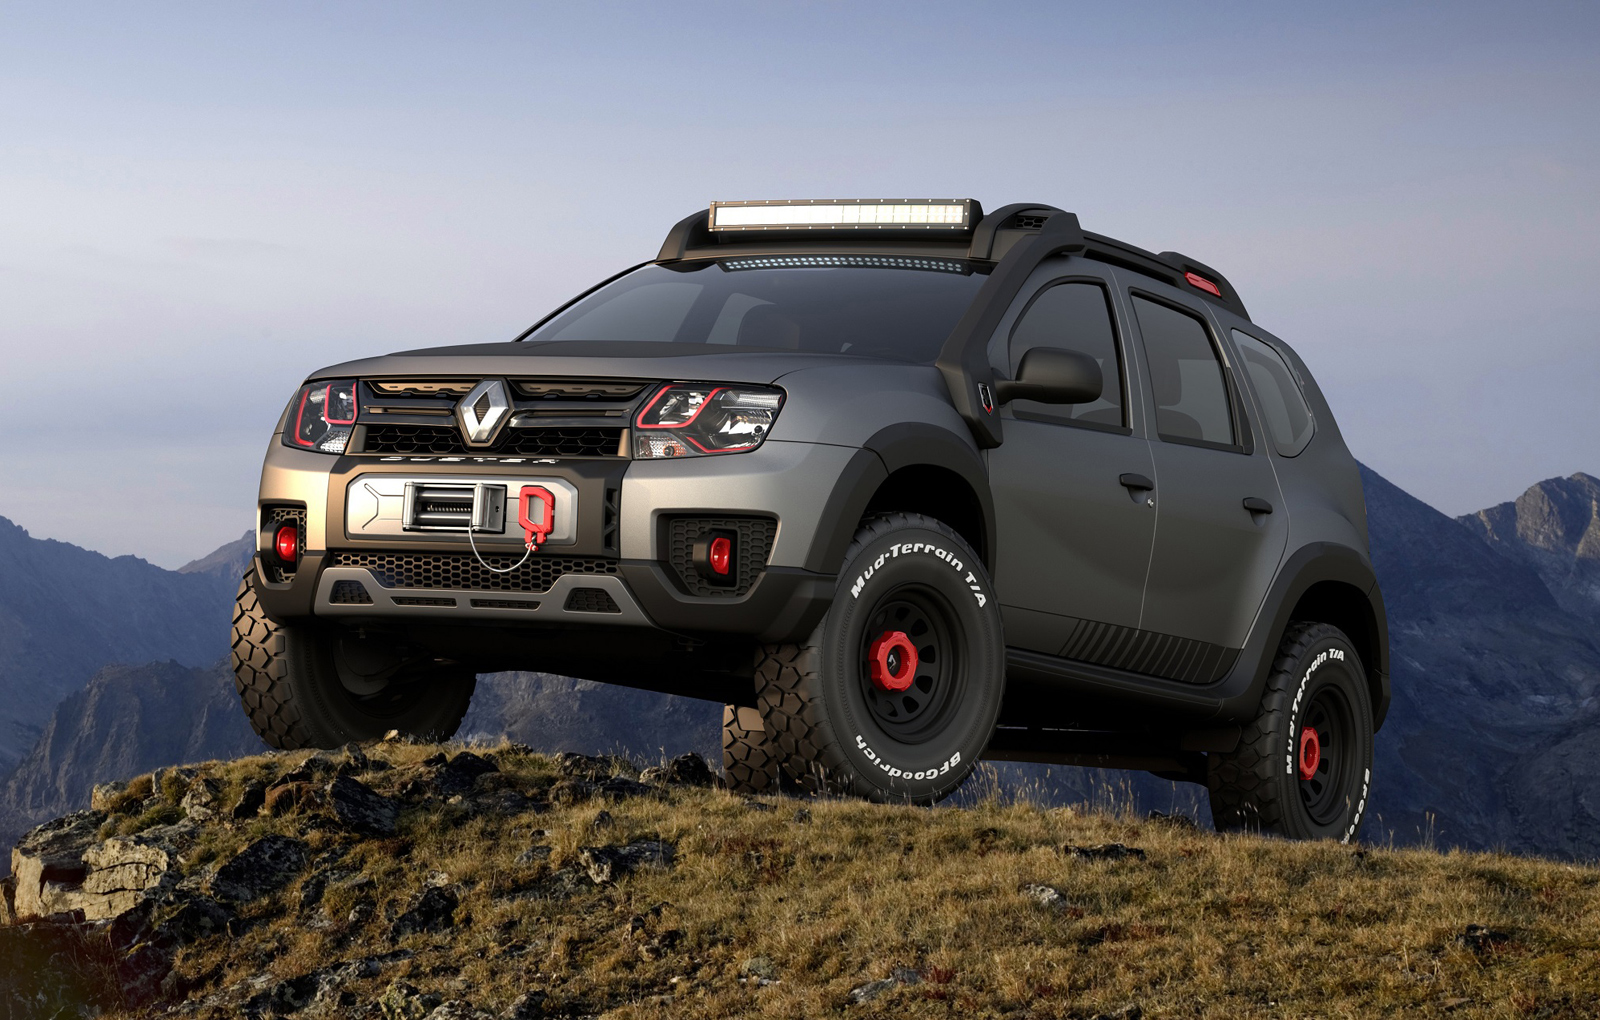 renault-duster-extreme-concept